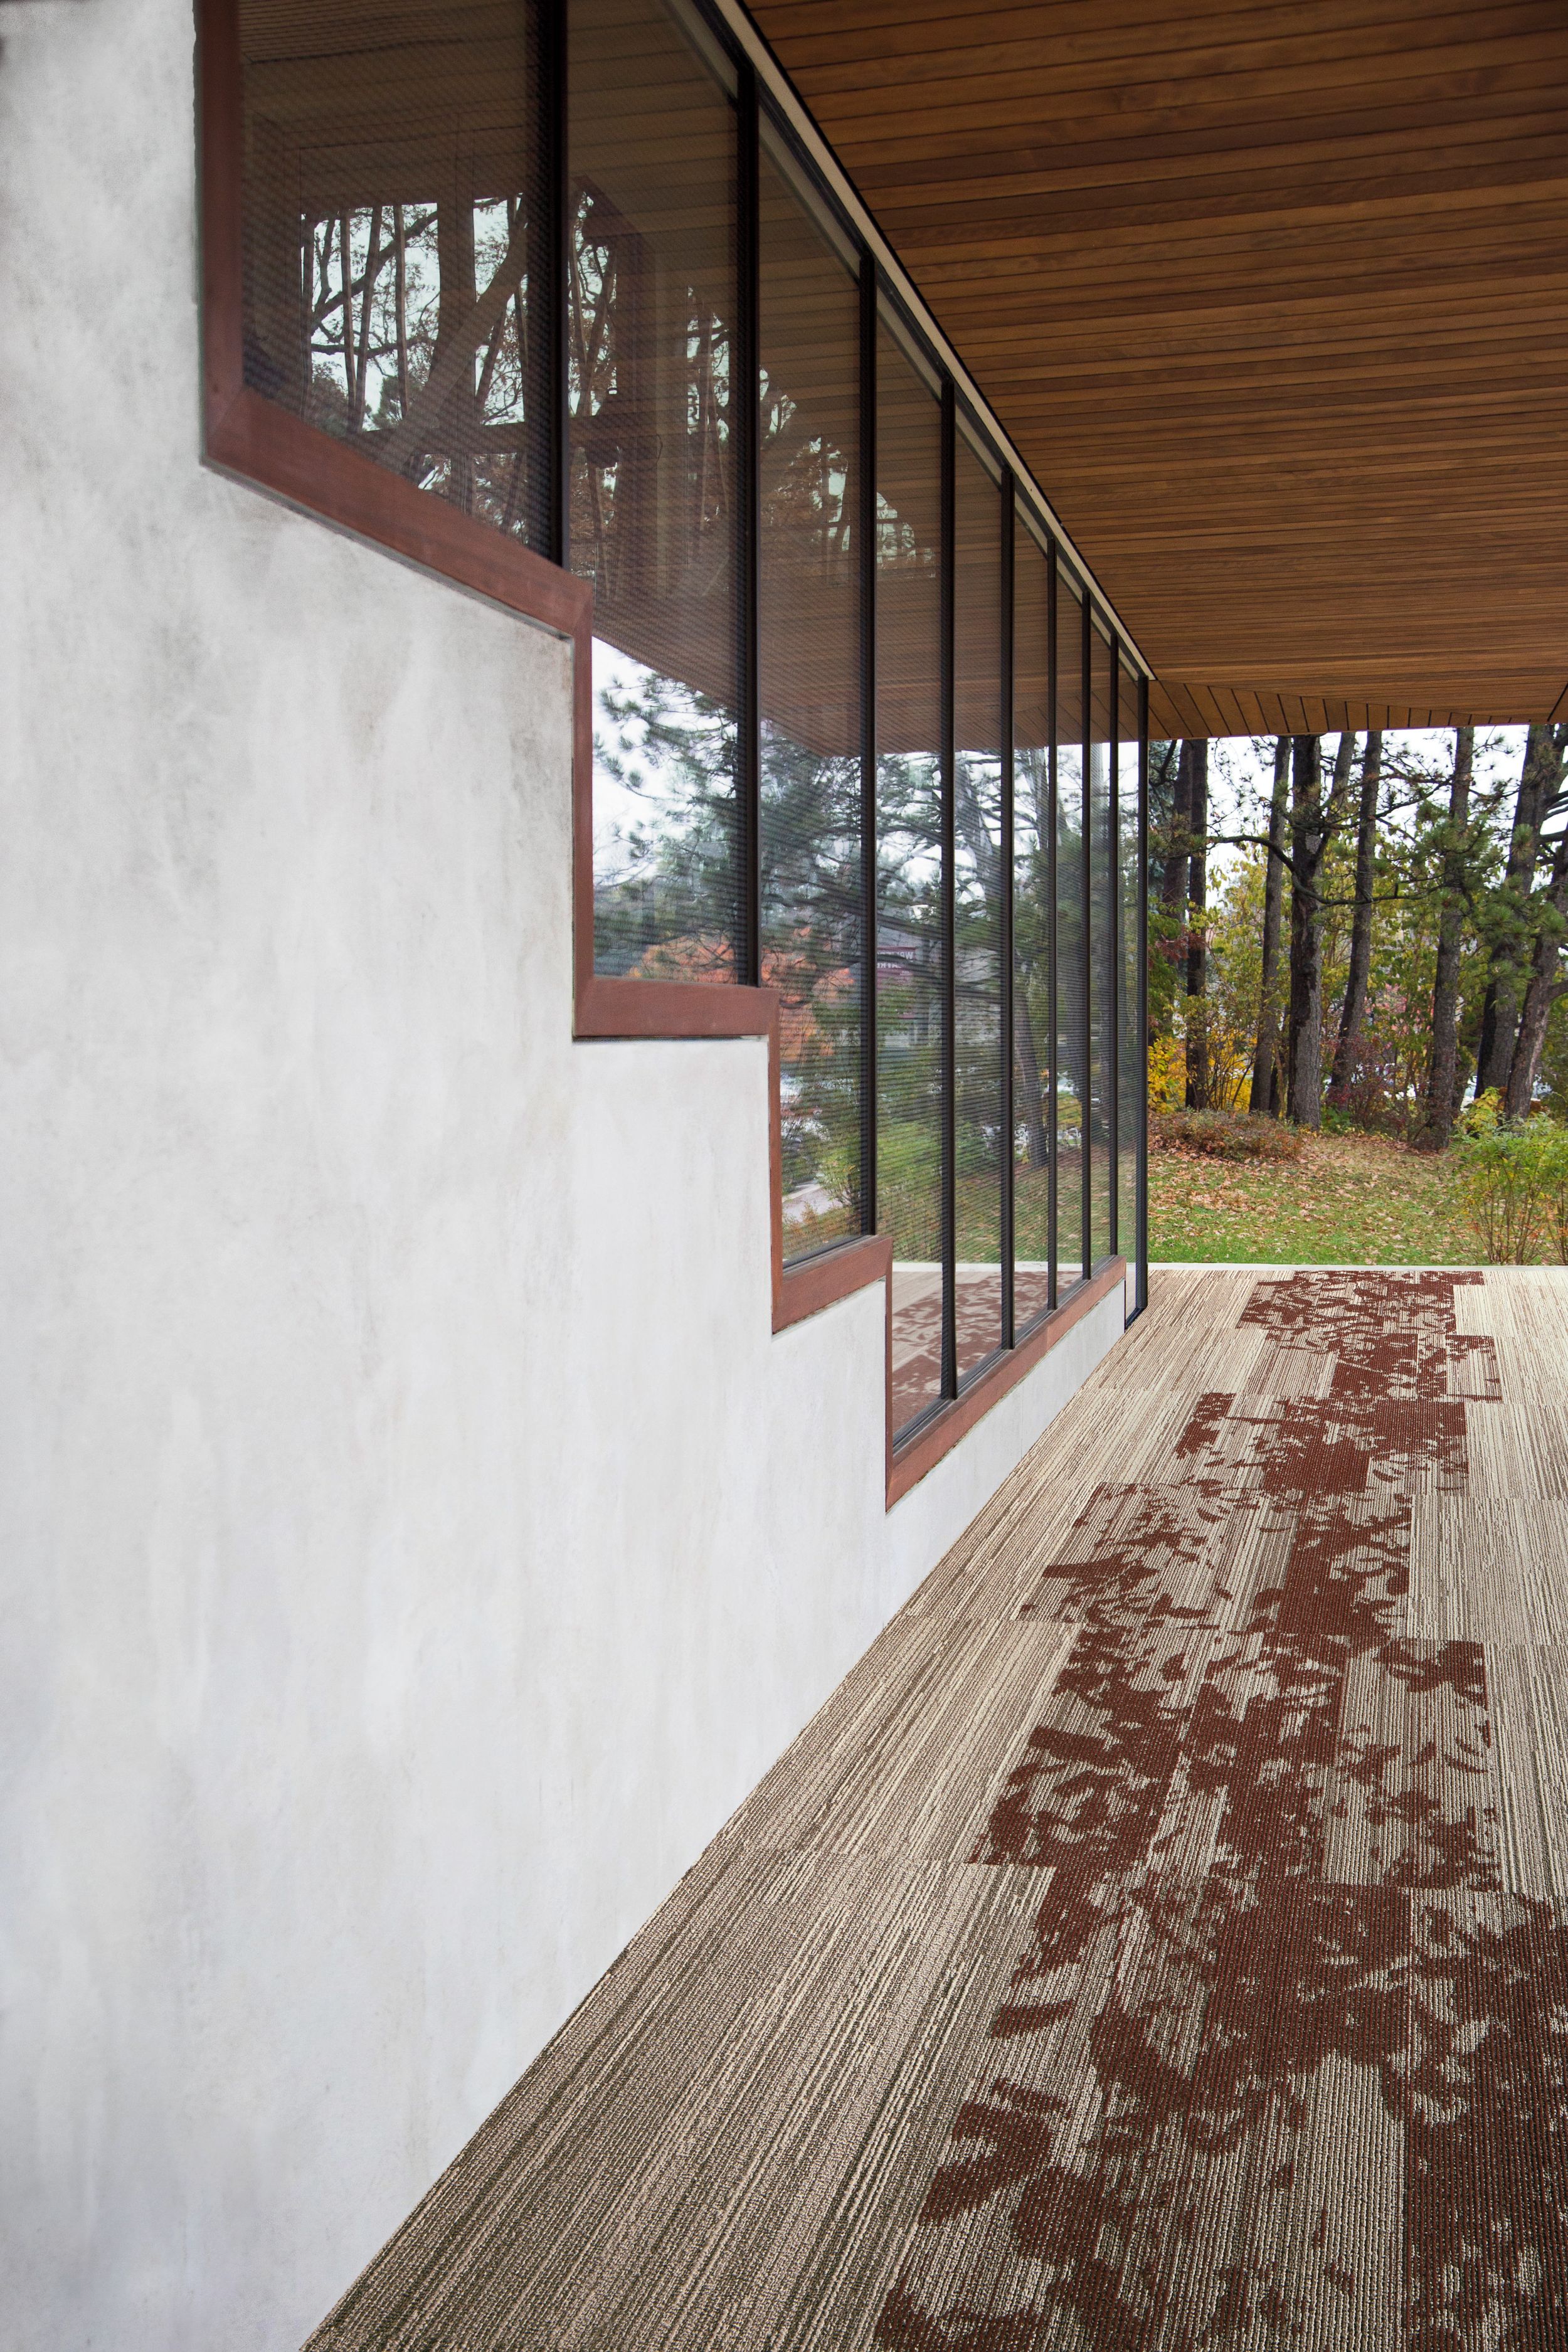 Interface Progression III and Glazing plank carpet tile shown for inspiration in outdoor setting numéro d’image 12